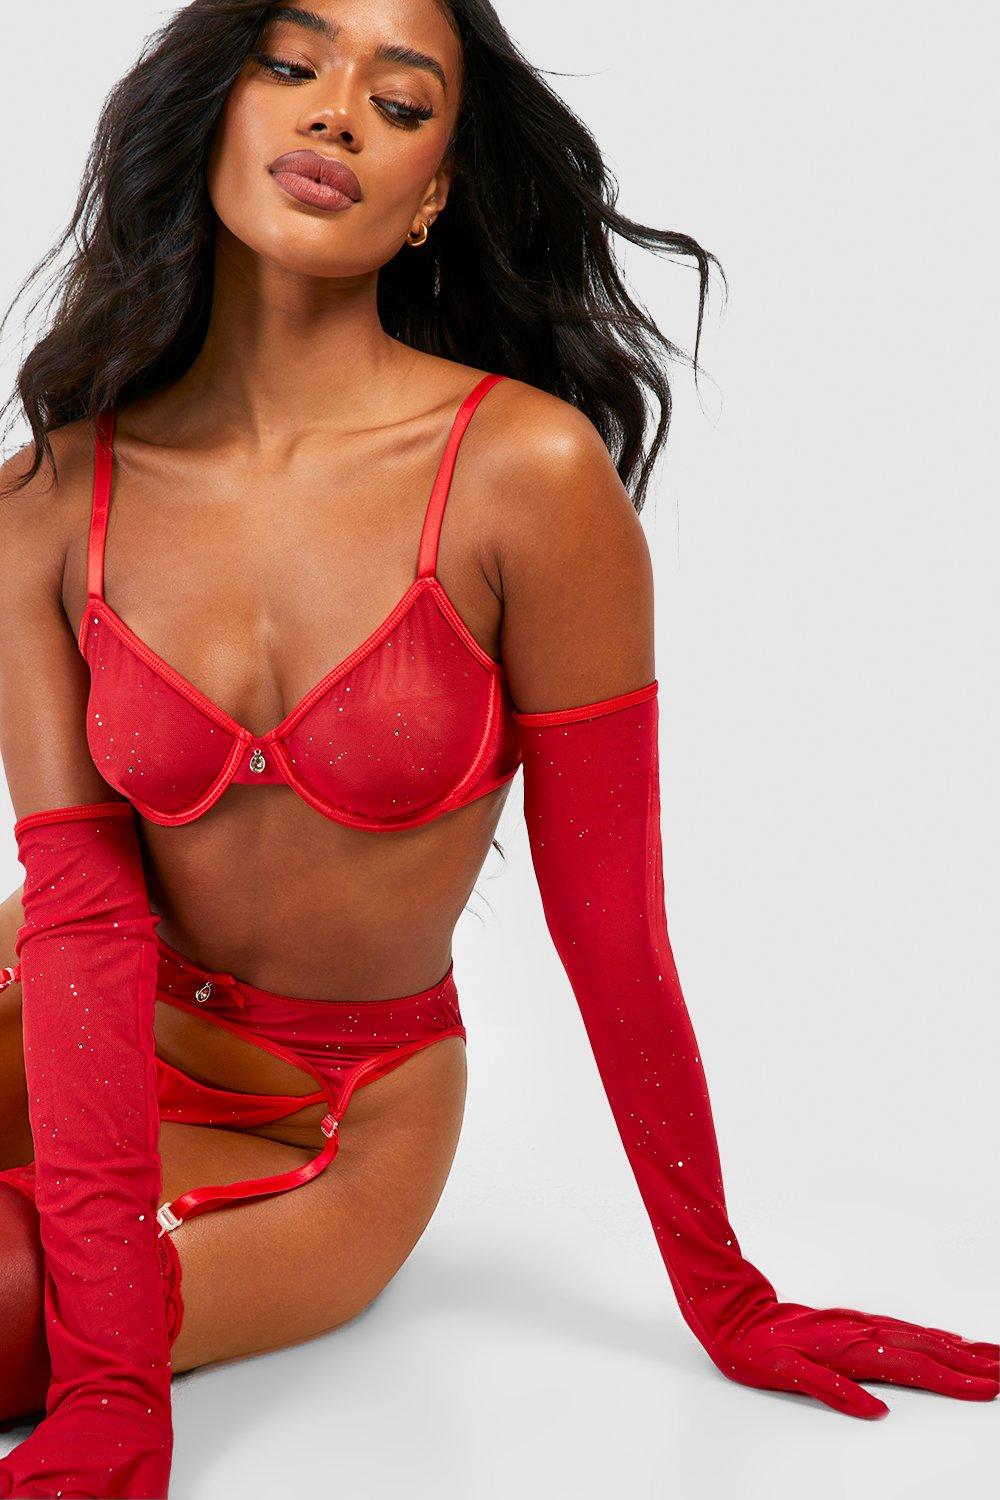 Bras N Things - Red with a touch of silver sparkle! The